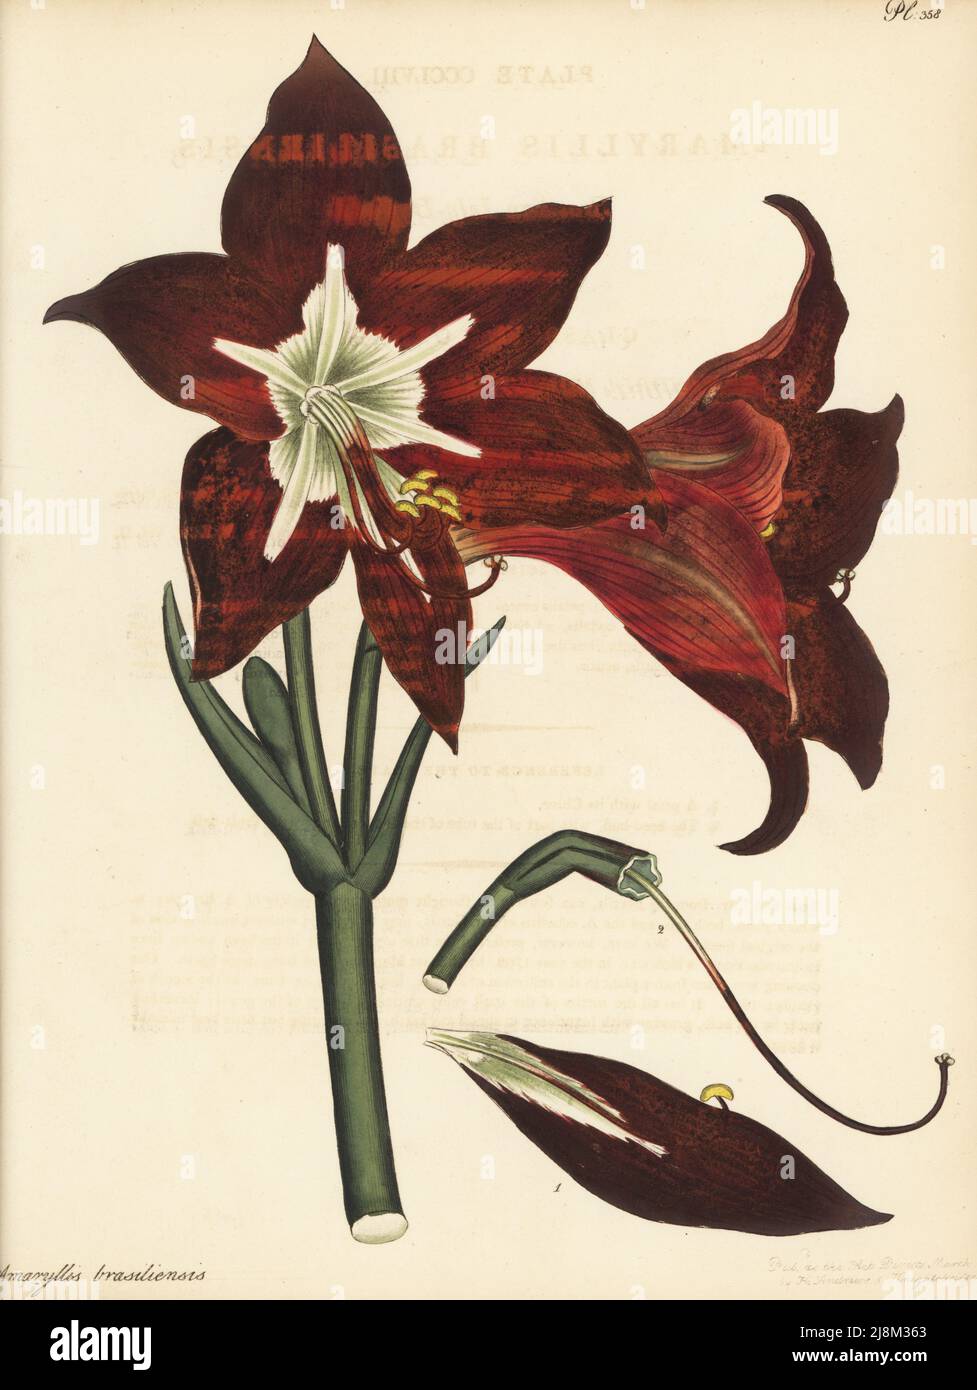 Barbados lily, Hippeastrum puniceum. Brasilian lily-daffodil, Amaryllis brasiliensis. Native of Brazil, in the collection of James Vere, Kensington Gore. Copperplate engraving drawn, engraved and hand-coloured by Henry Andrews from his Botanical Register, Volume 5, self-published in Knightsbridge, London, 1804. Stock Photo